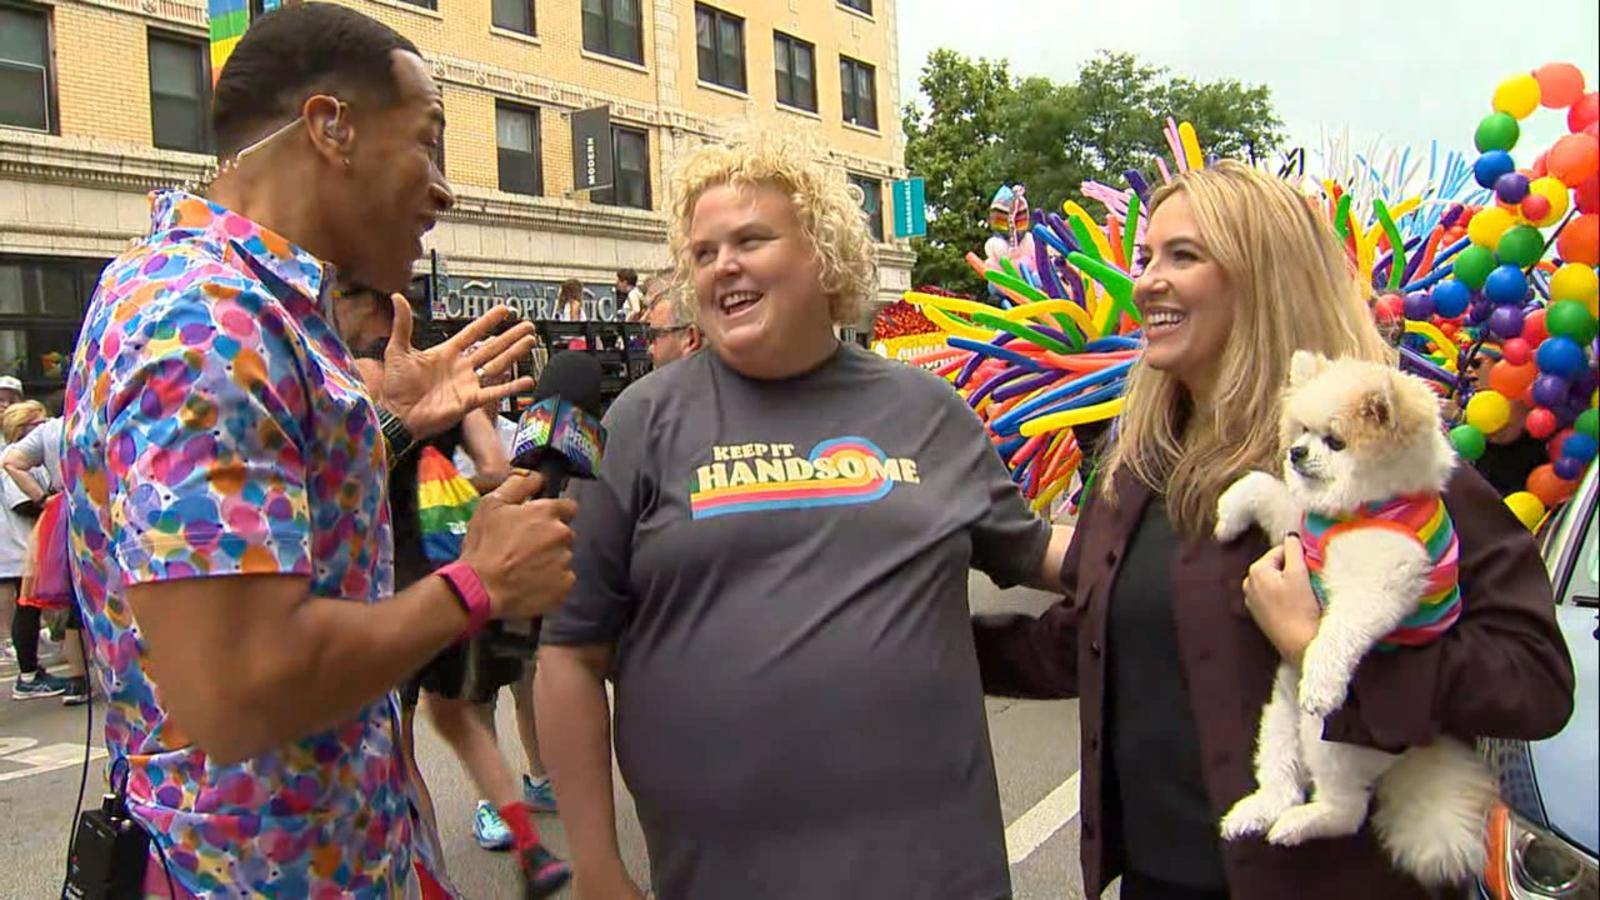 Video Comedian Fortune Feimster on coming full circle at Pride